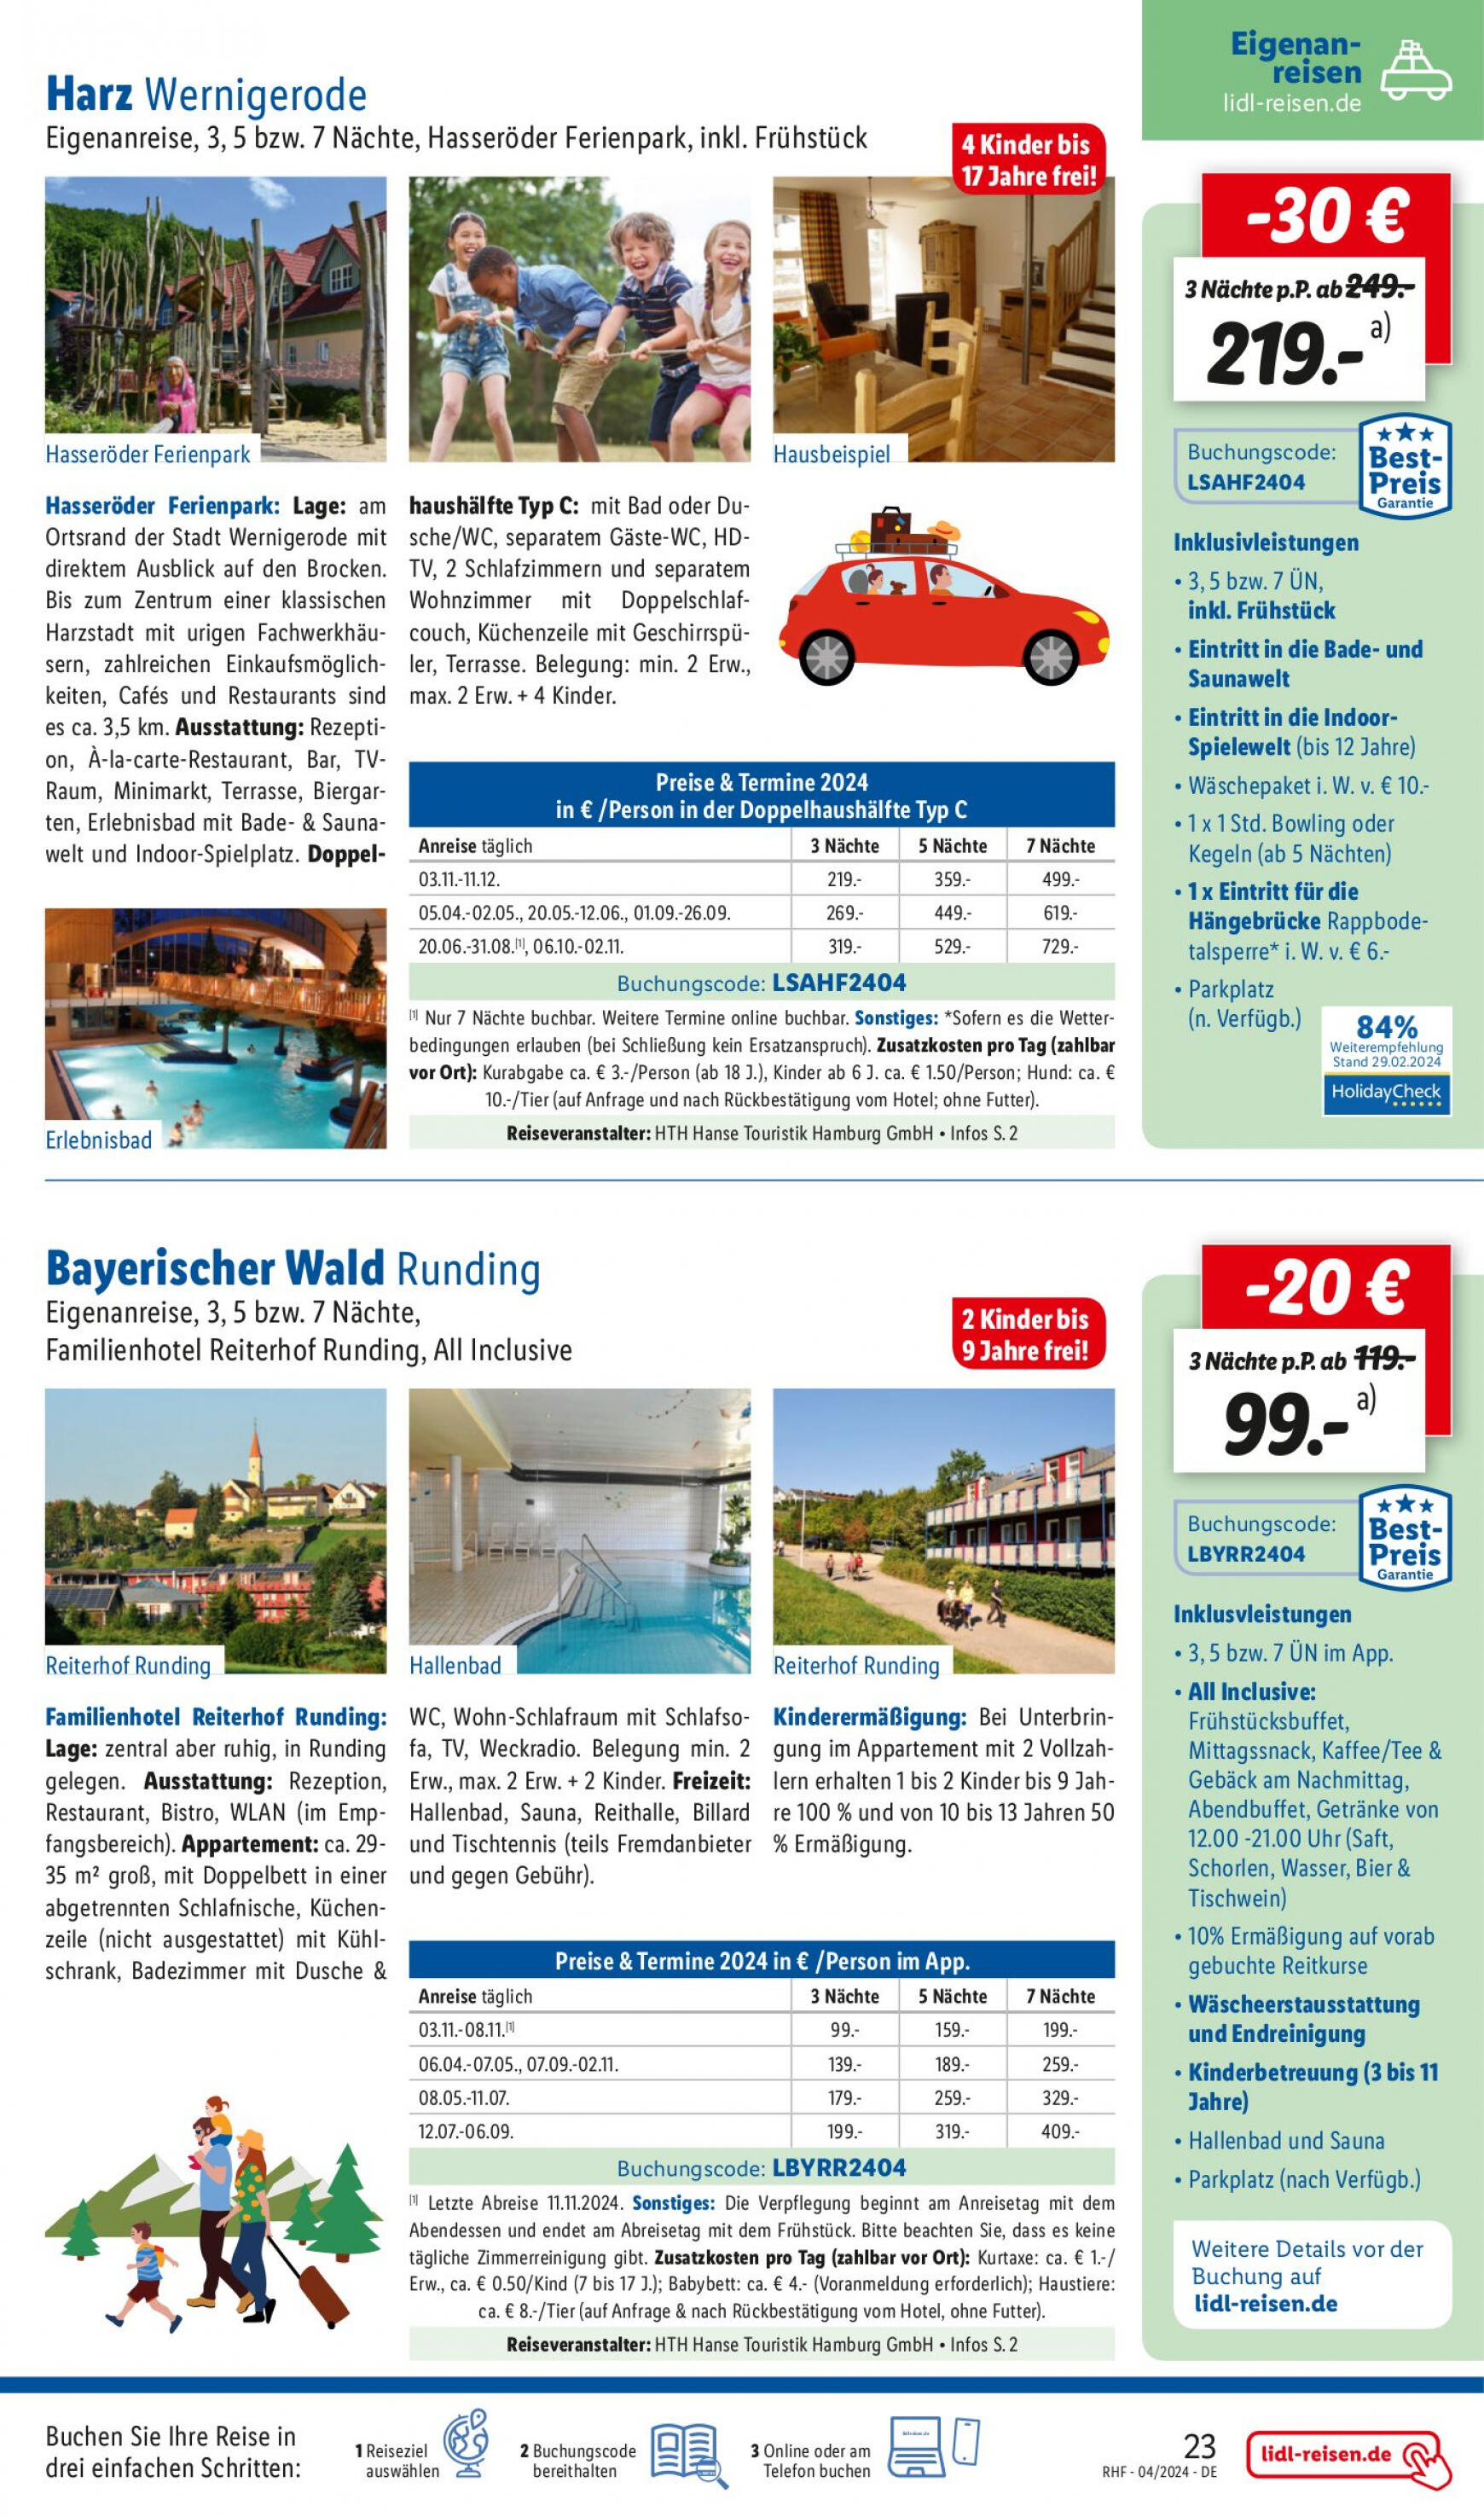 lidl - Flyer Lidl - April Reise-Highlights aktuell 27.03. - 30.04. - page: 23